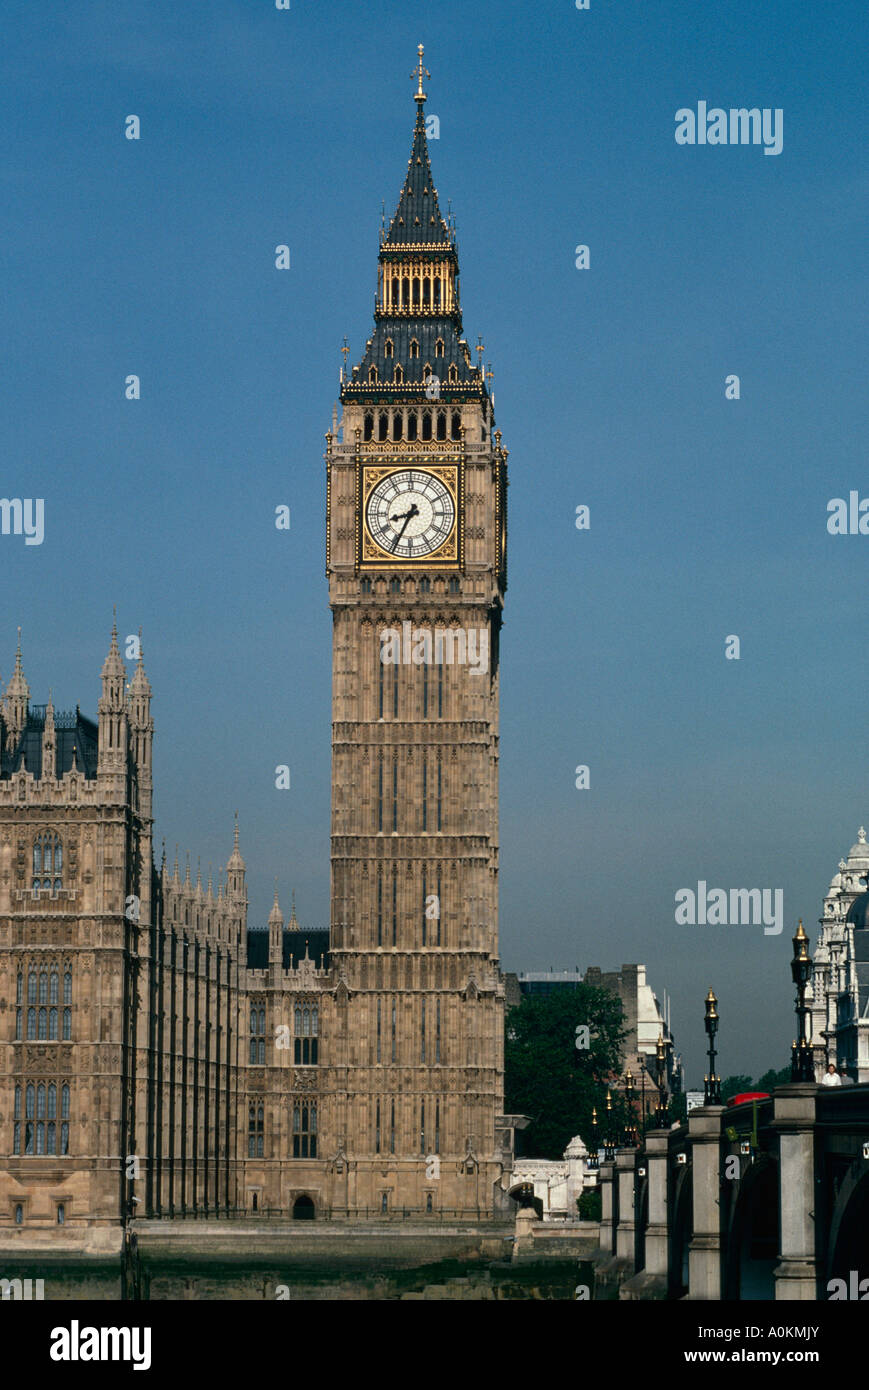 The tower of Big Ben at the Houses of Parliament in London England Stock Photo